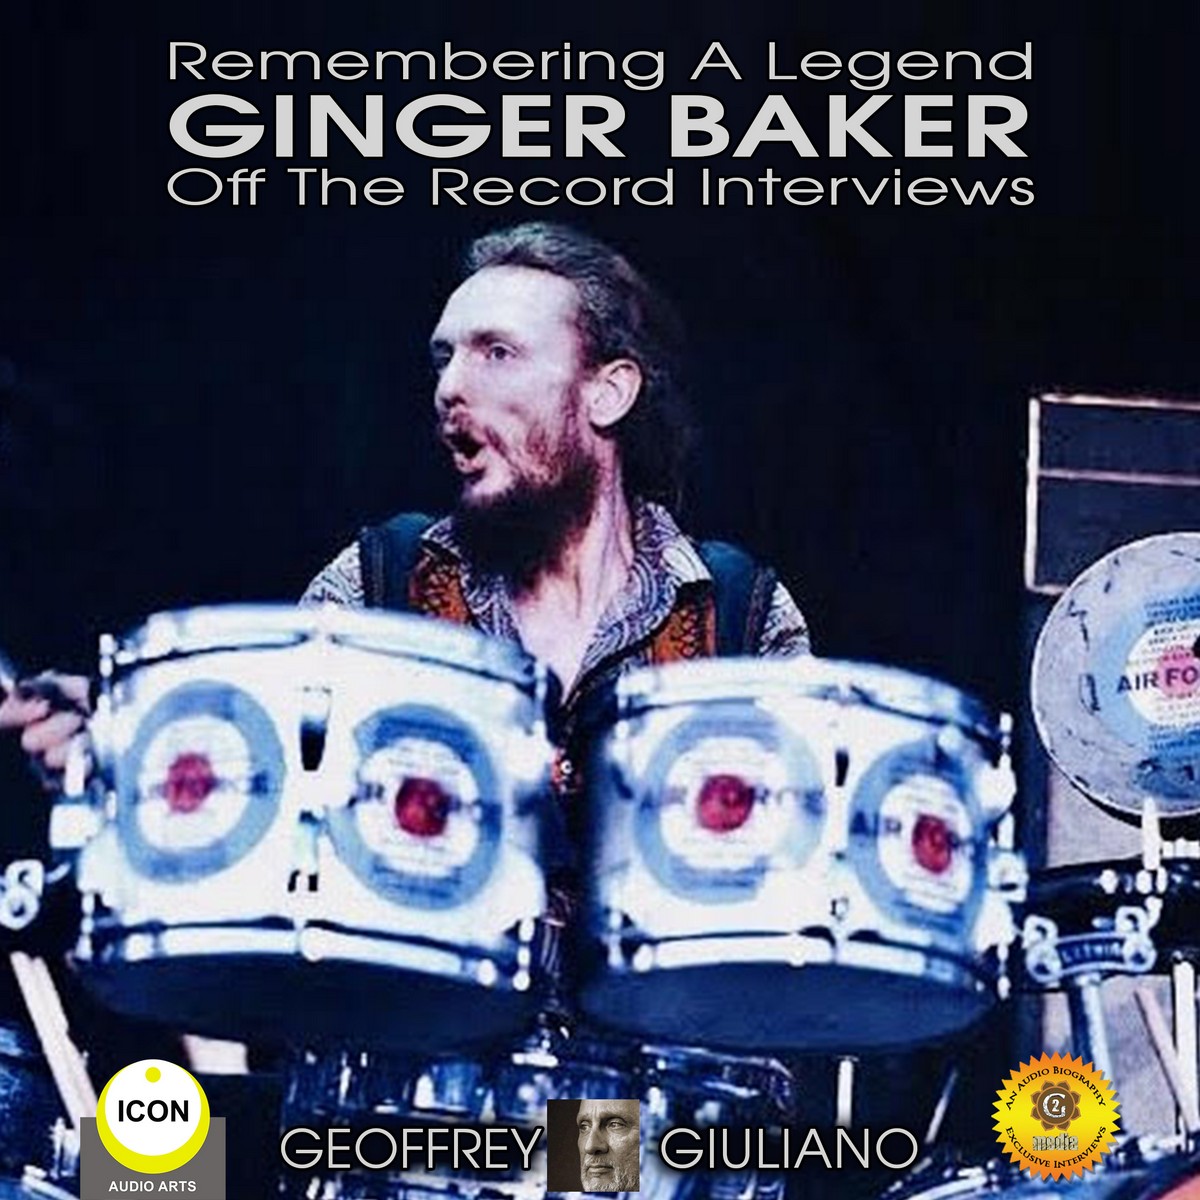 Remembering The Legend Ginger Baker Off The Record Interviews